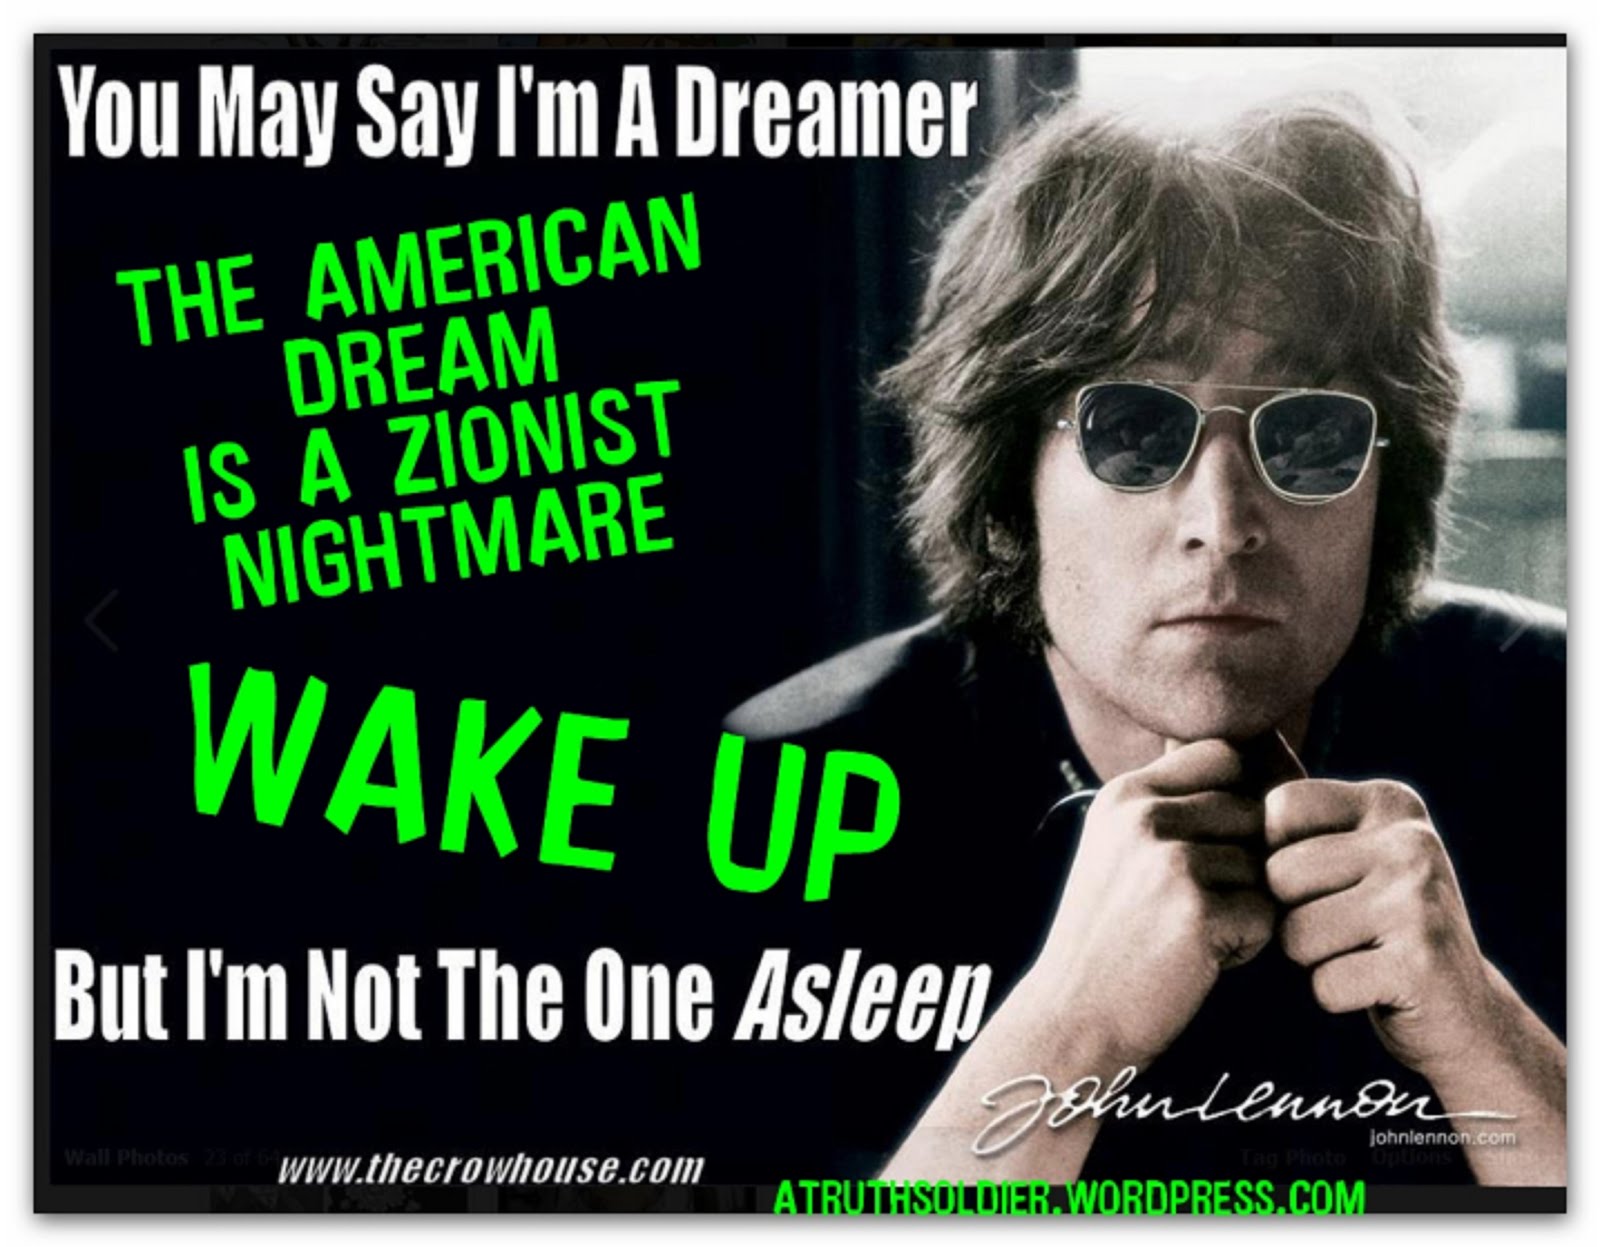 THE AMERICAN DREAM IS A ZIONIST NIGHTMARE